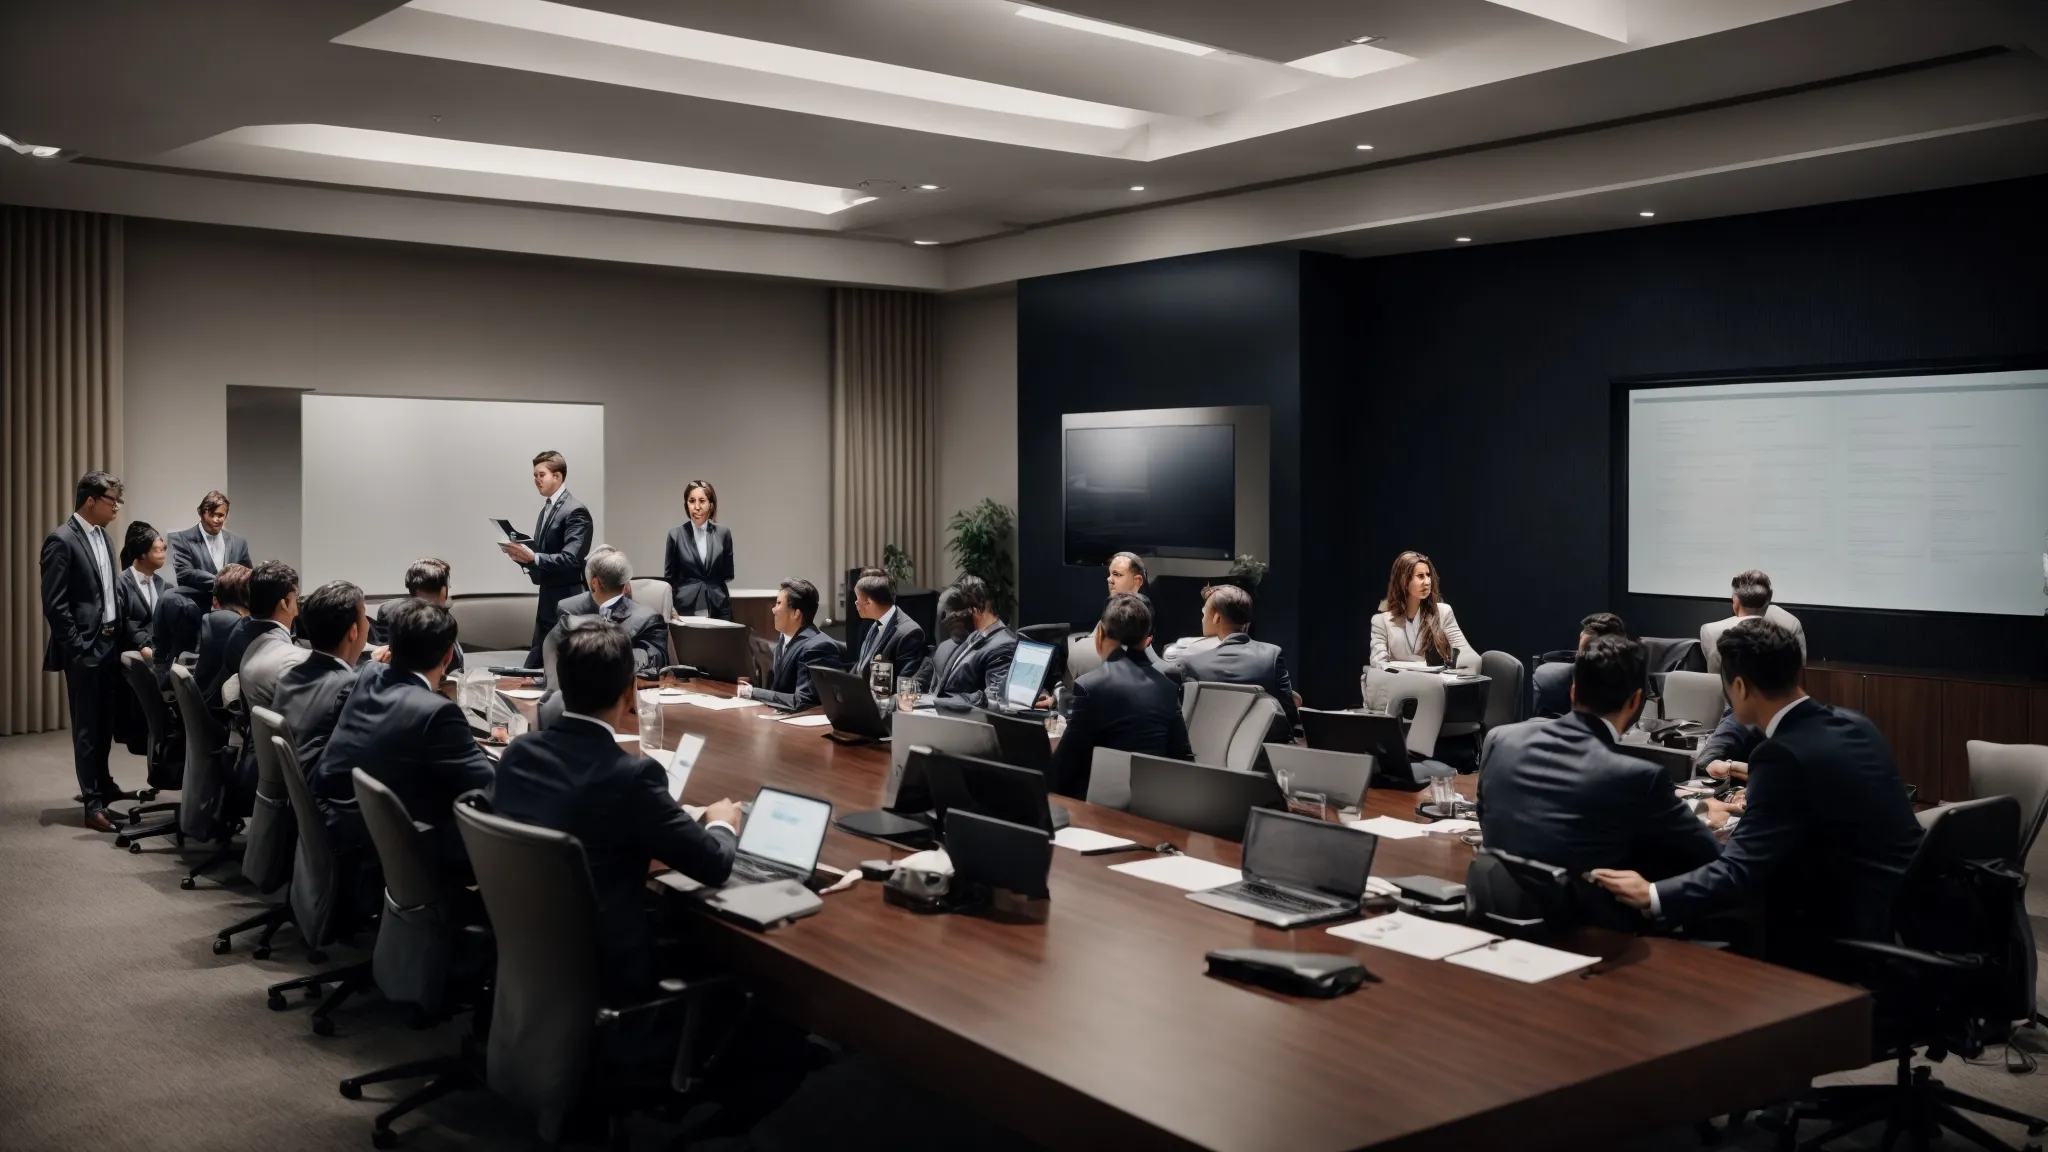 a conference room with a large table where business professionals are gathered, reviewing documents and using laptops, focused on compliance and regulation strategies.